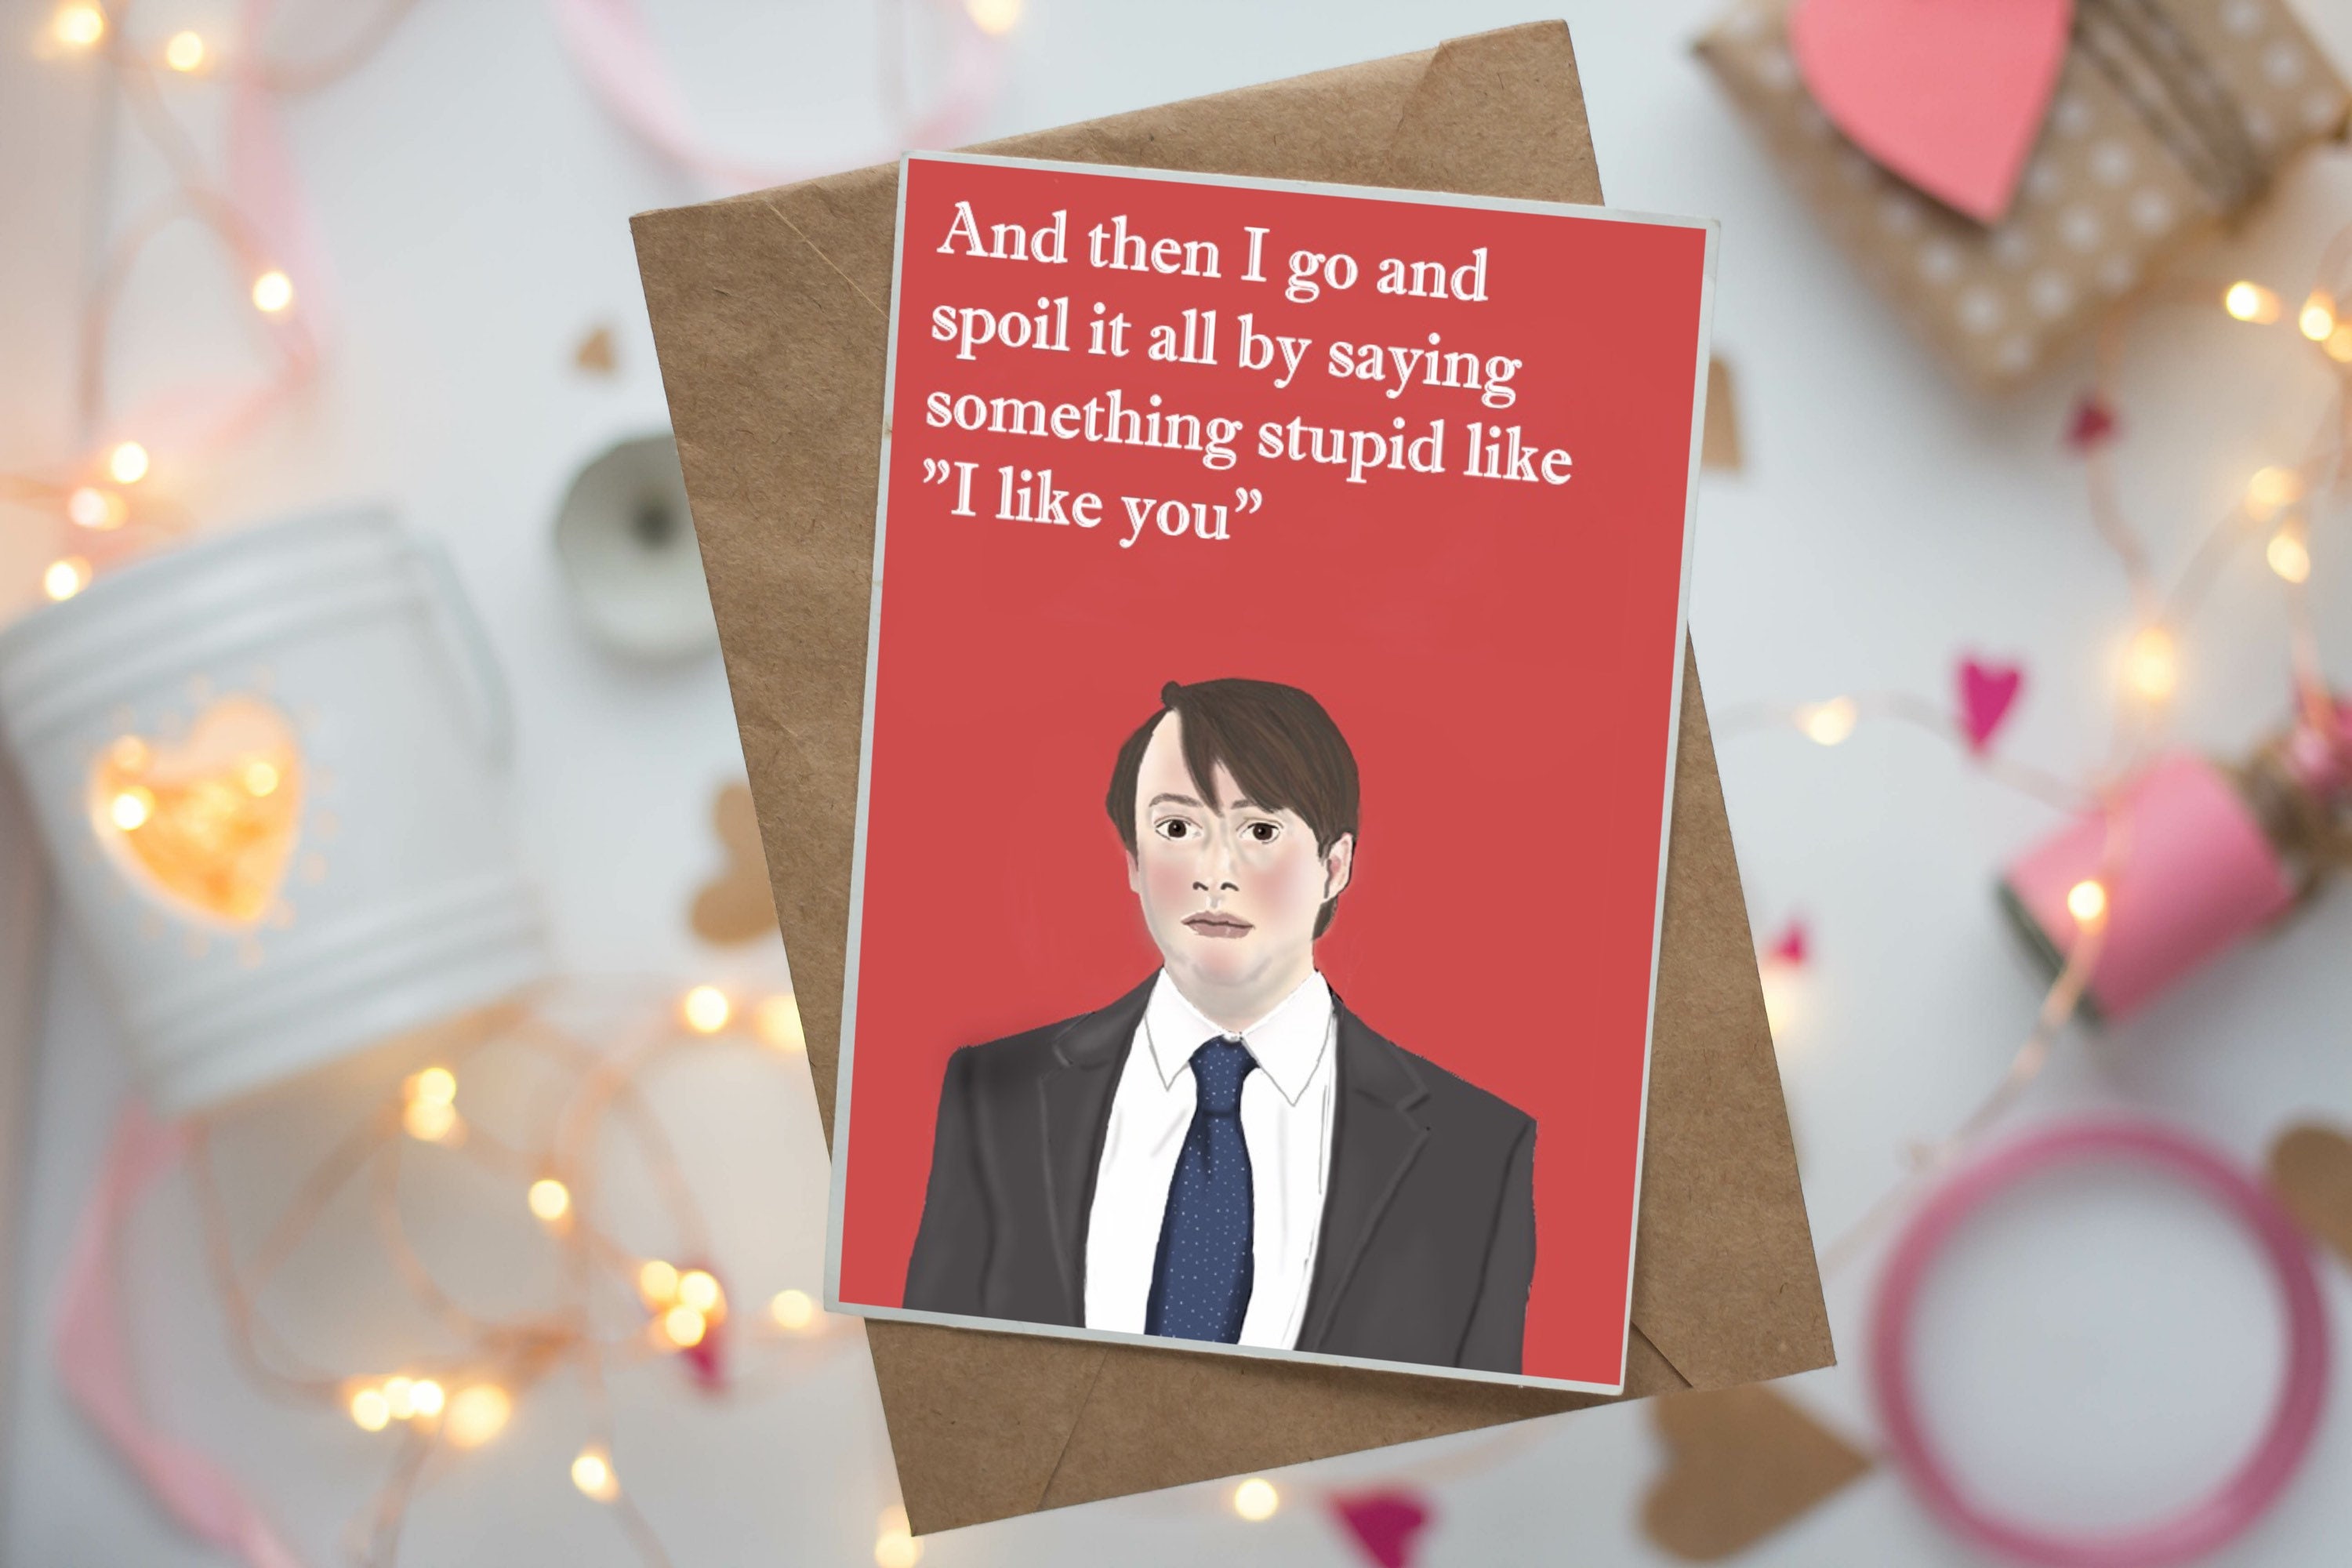 Vegetarian Love Letter: Humorous Valentine's Day Paper Greeting Card